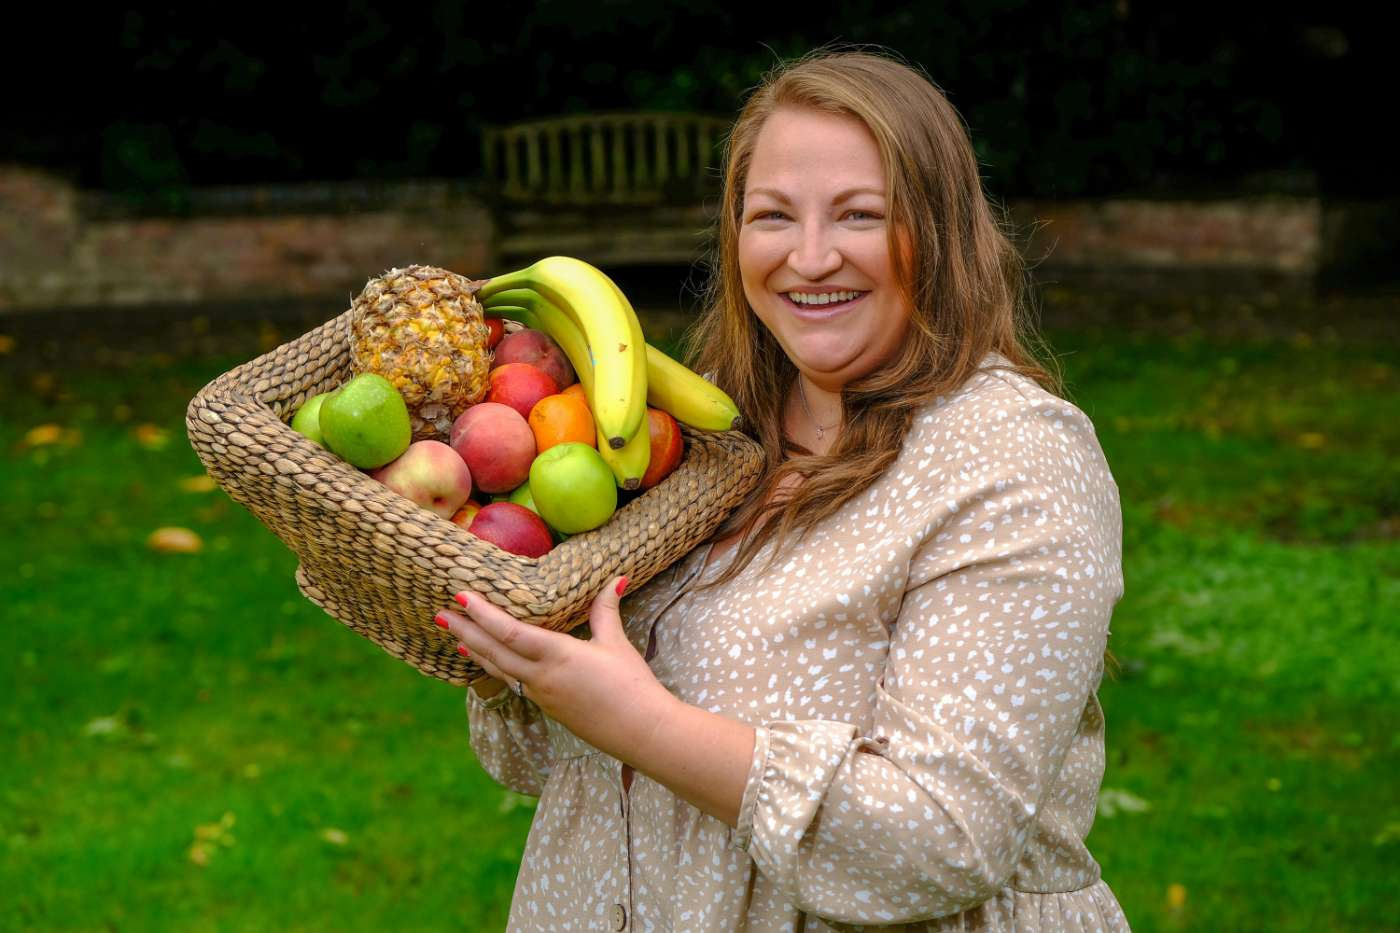 This Woman’s Lifelong Fear Of Fruit and Vegetables Was Cured By Hypnotherapy